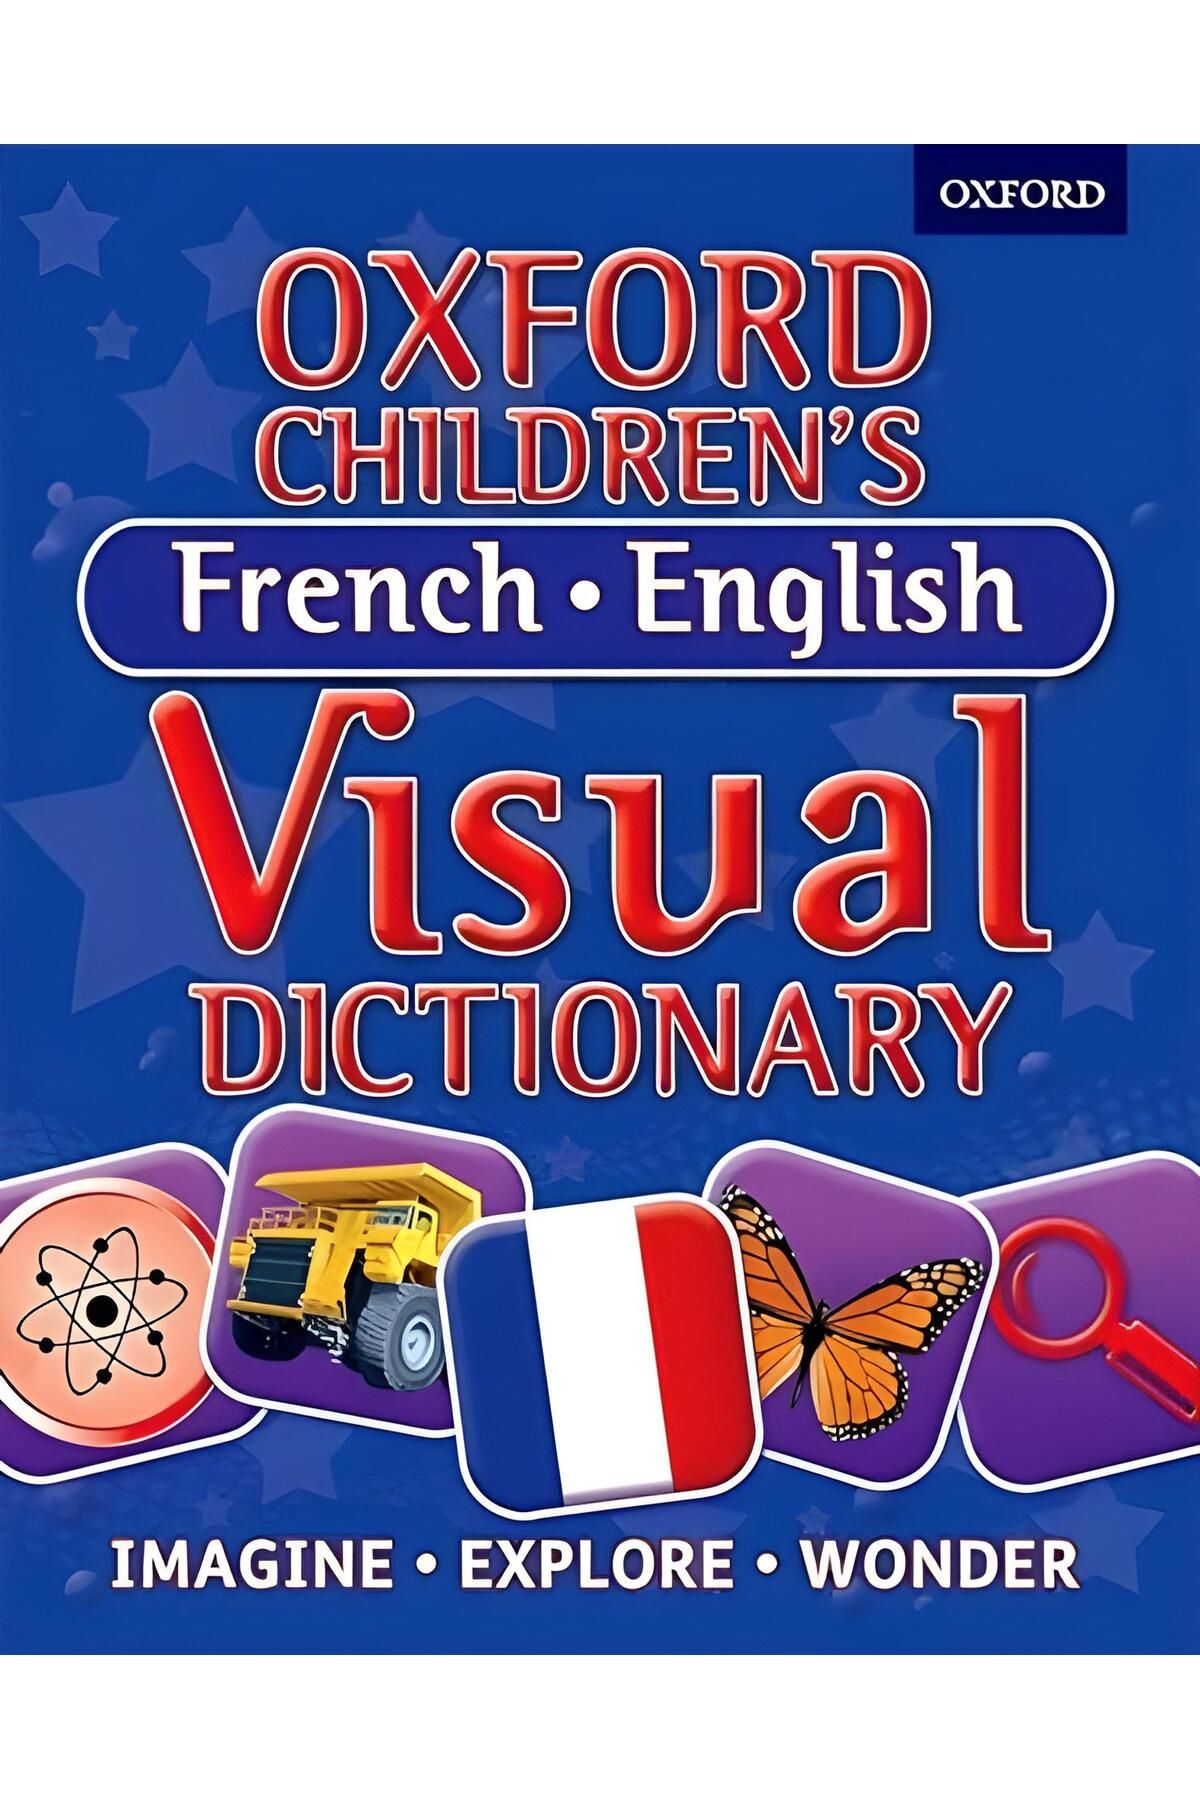 OXFORD UNIVERSITY PRESS Oxford Children's French-English Visual Dictionary